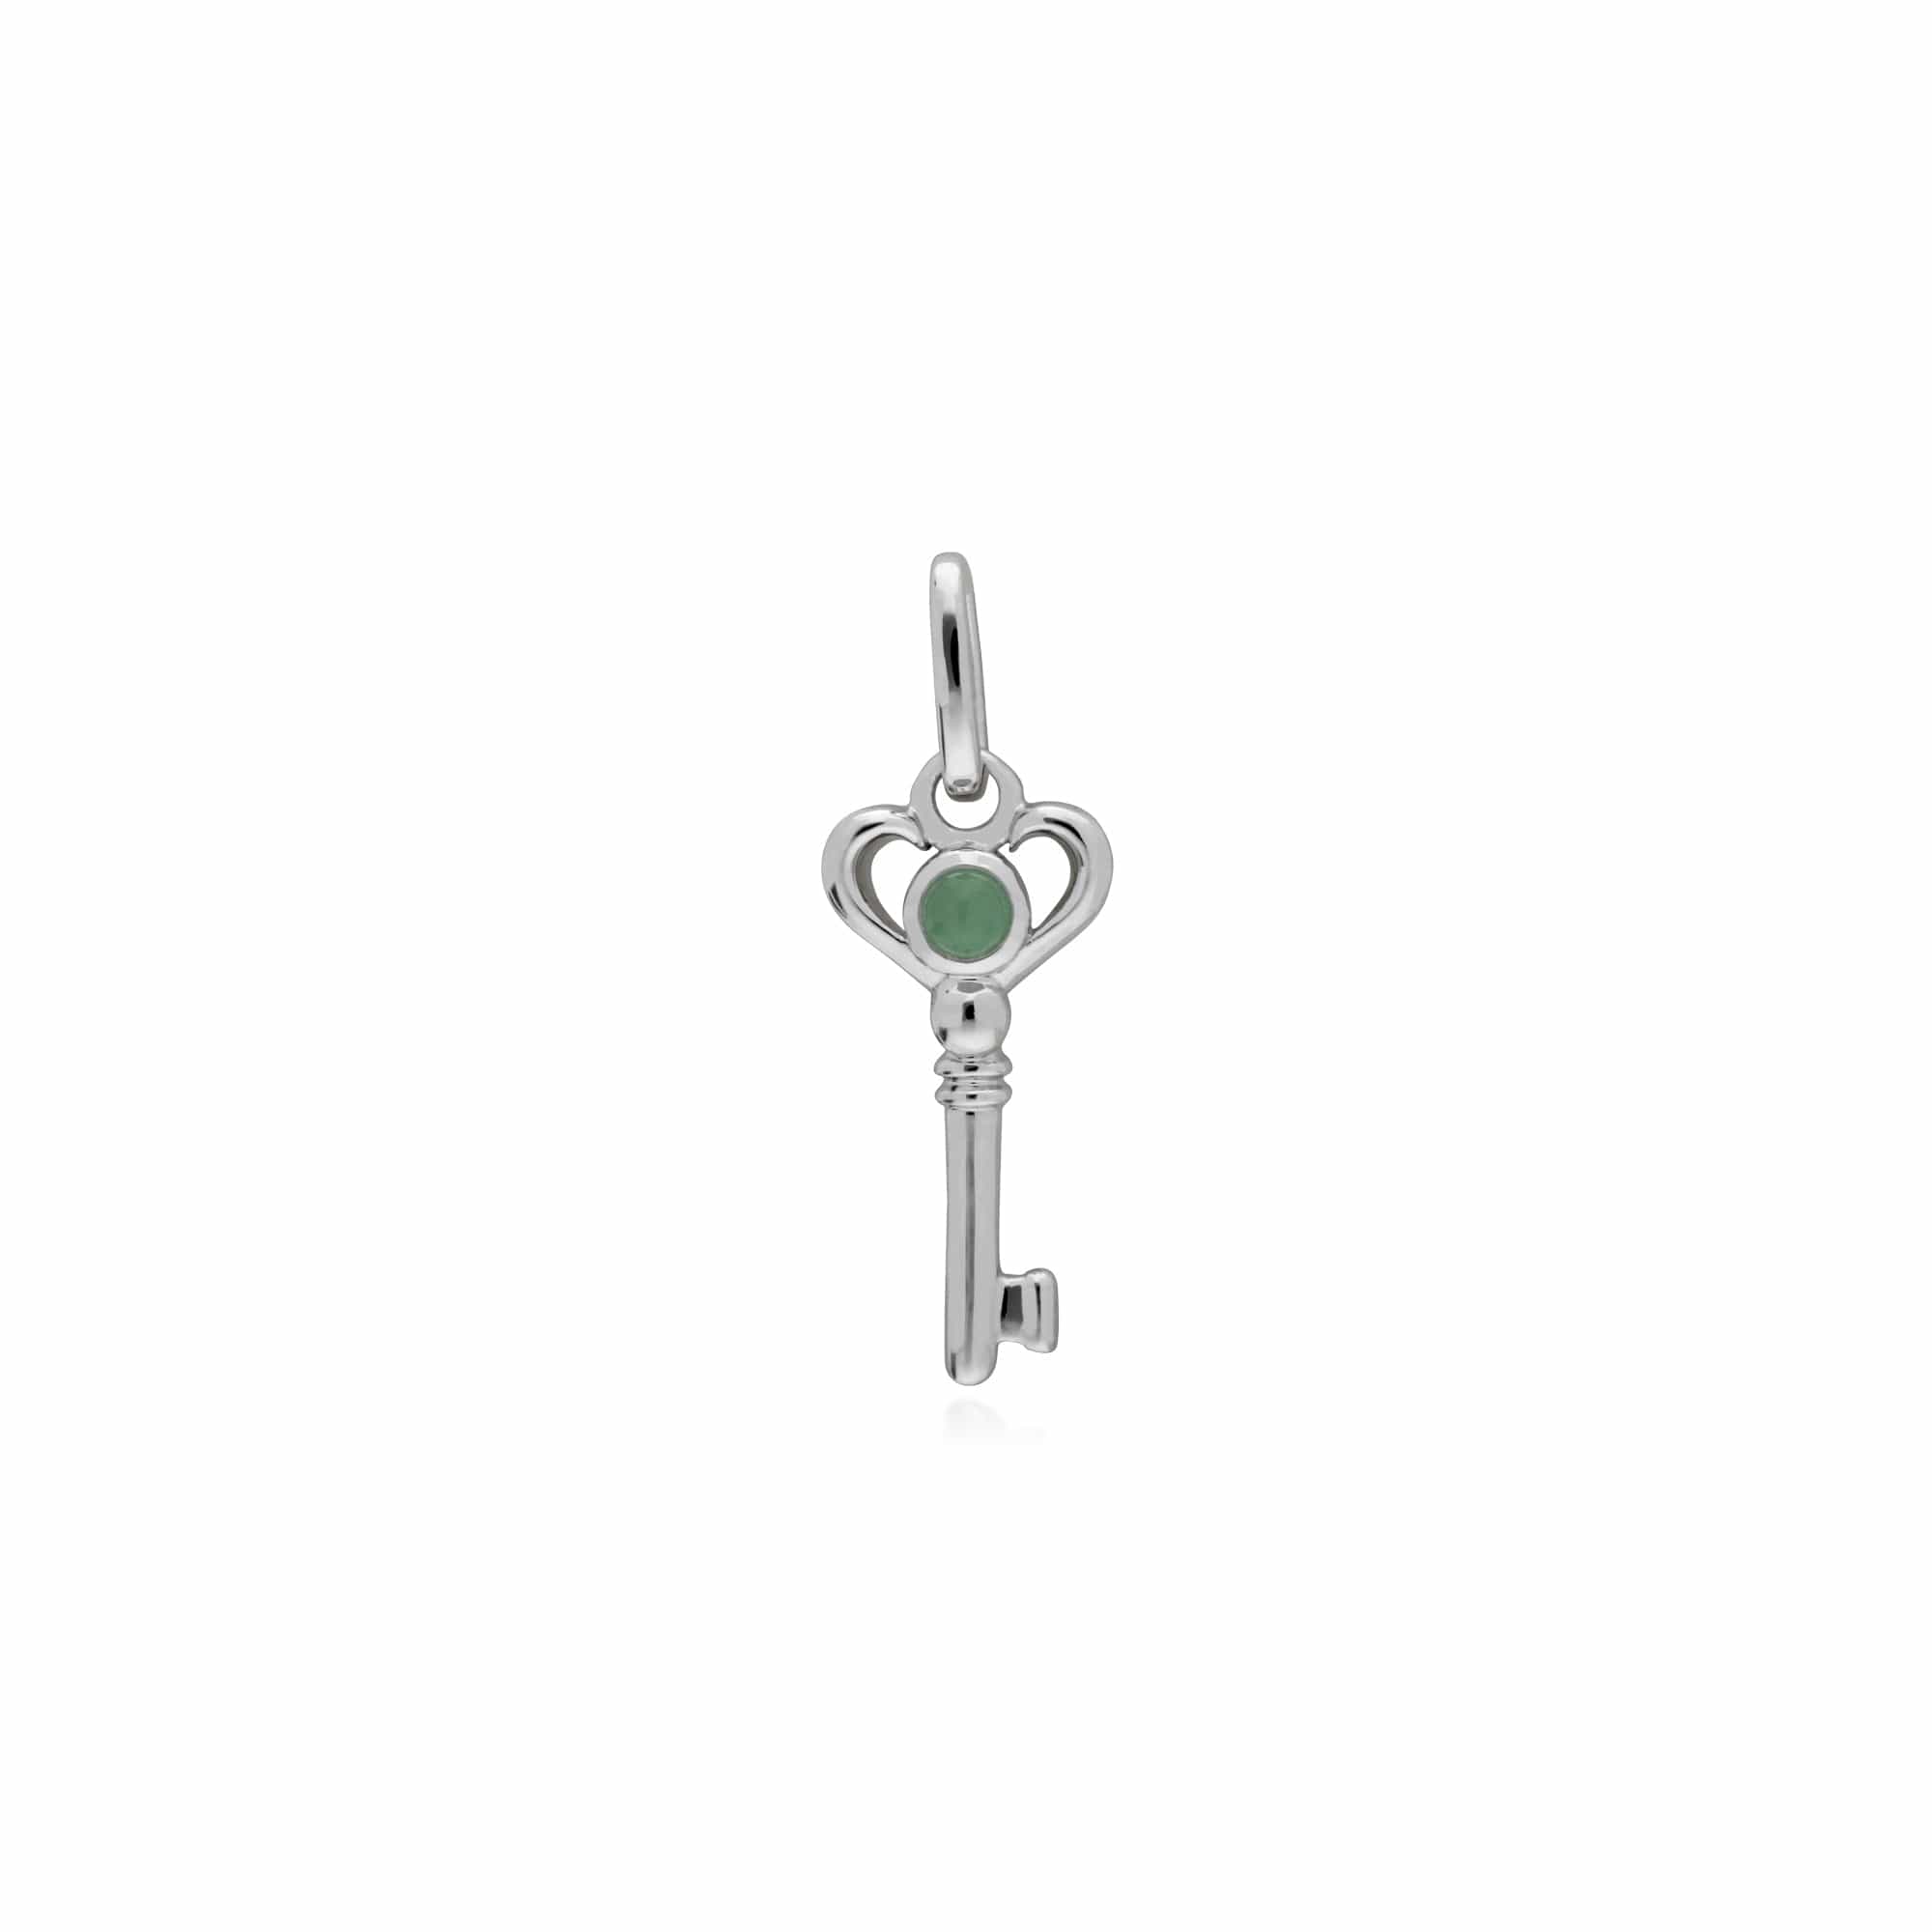 270P027501925-270P027001925 Classic Heart Lock Pendant & Jade Key Charm in 925 Sterling Silver 2